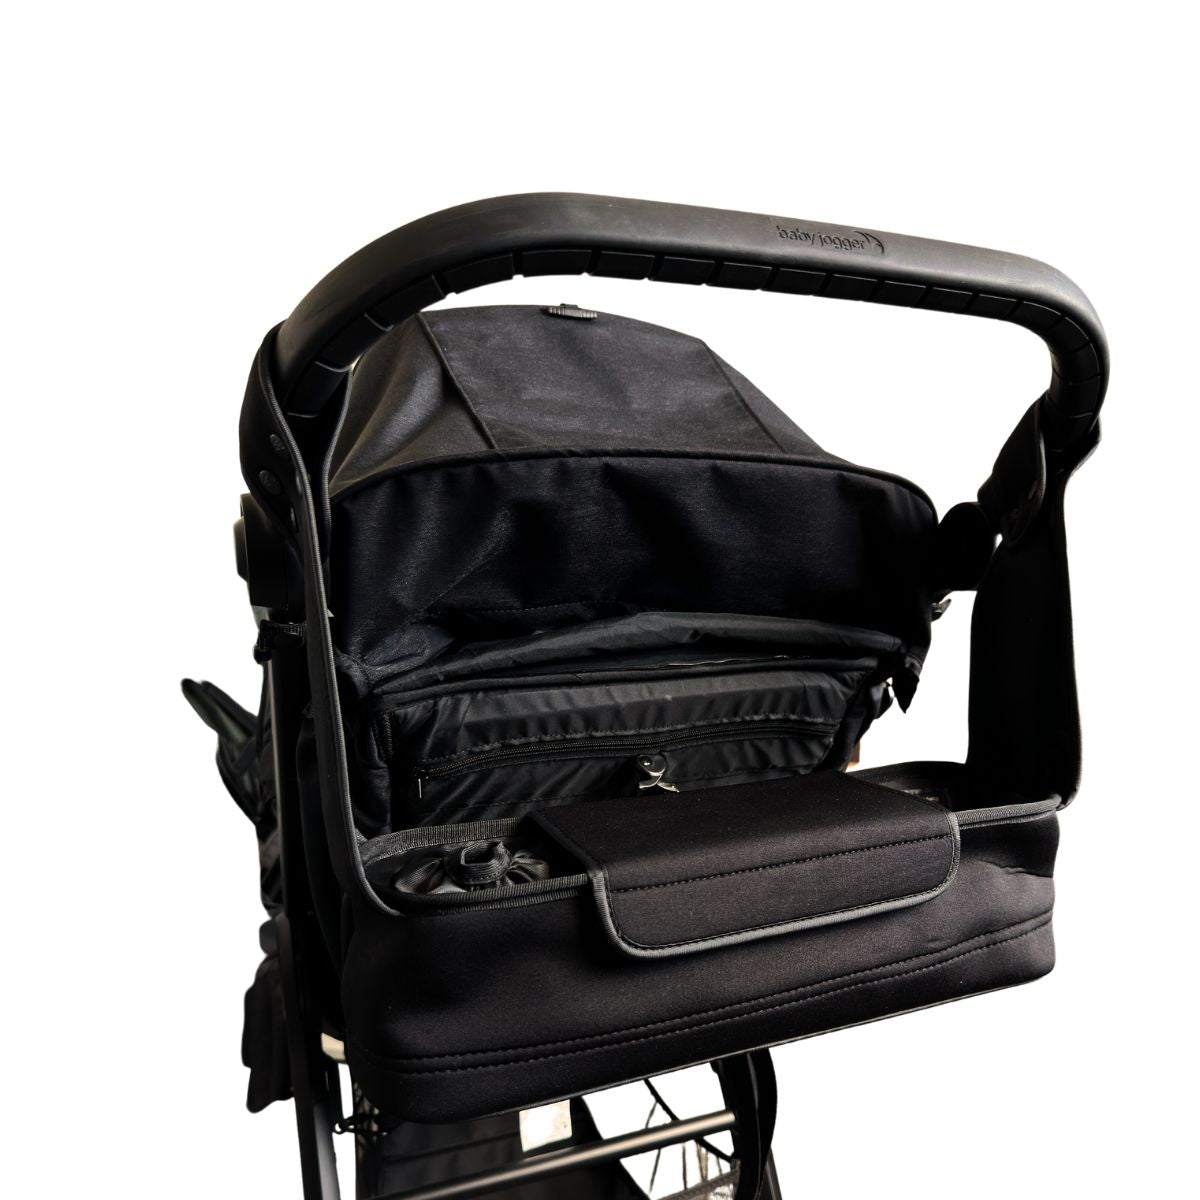 Baby Jogger City Sights/Select 2 Parent Console organizer